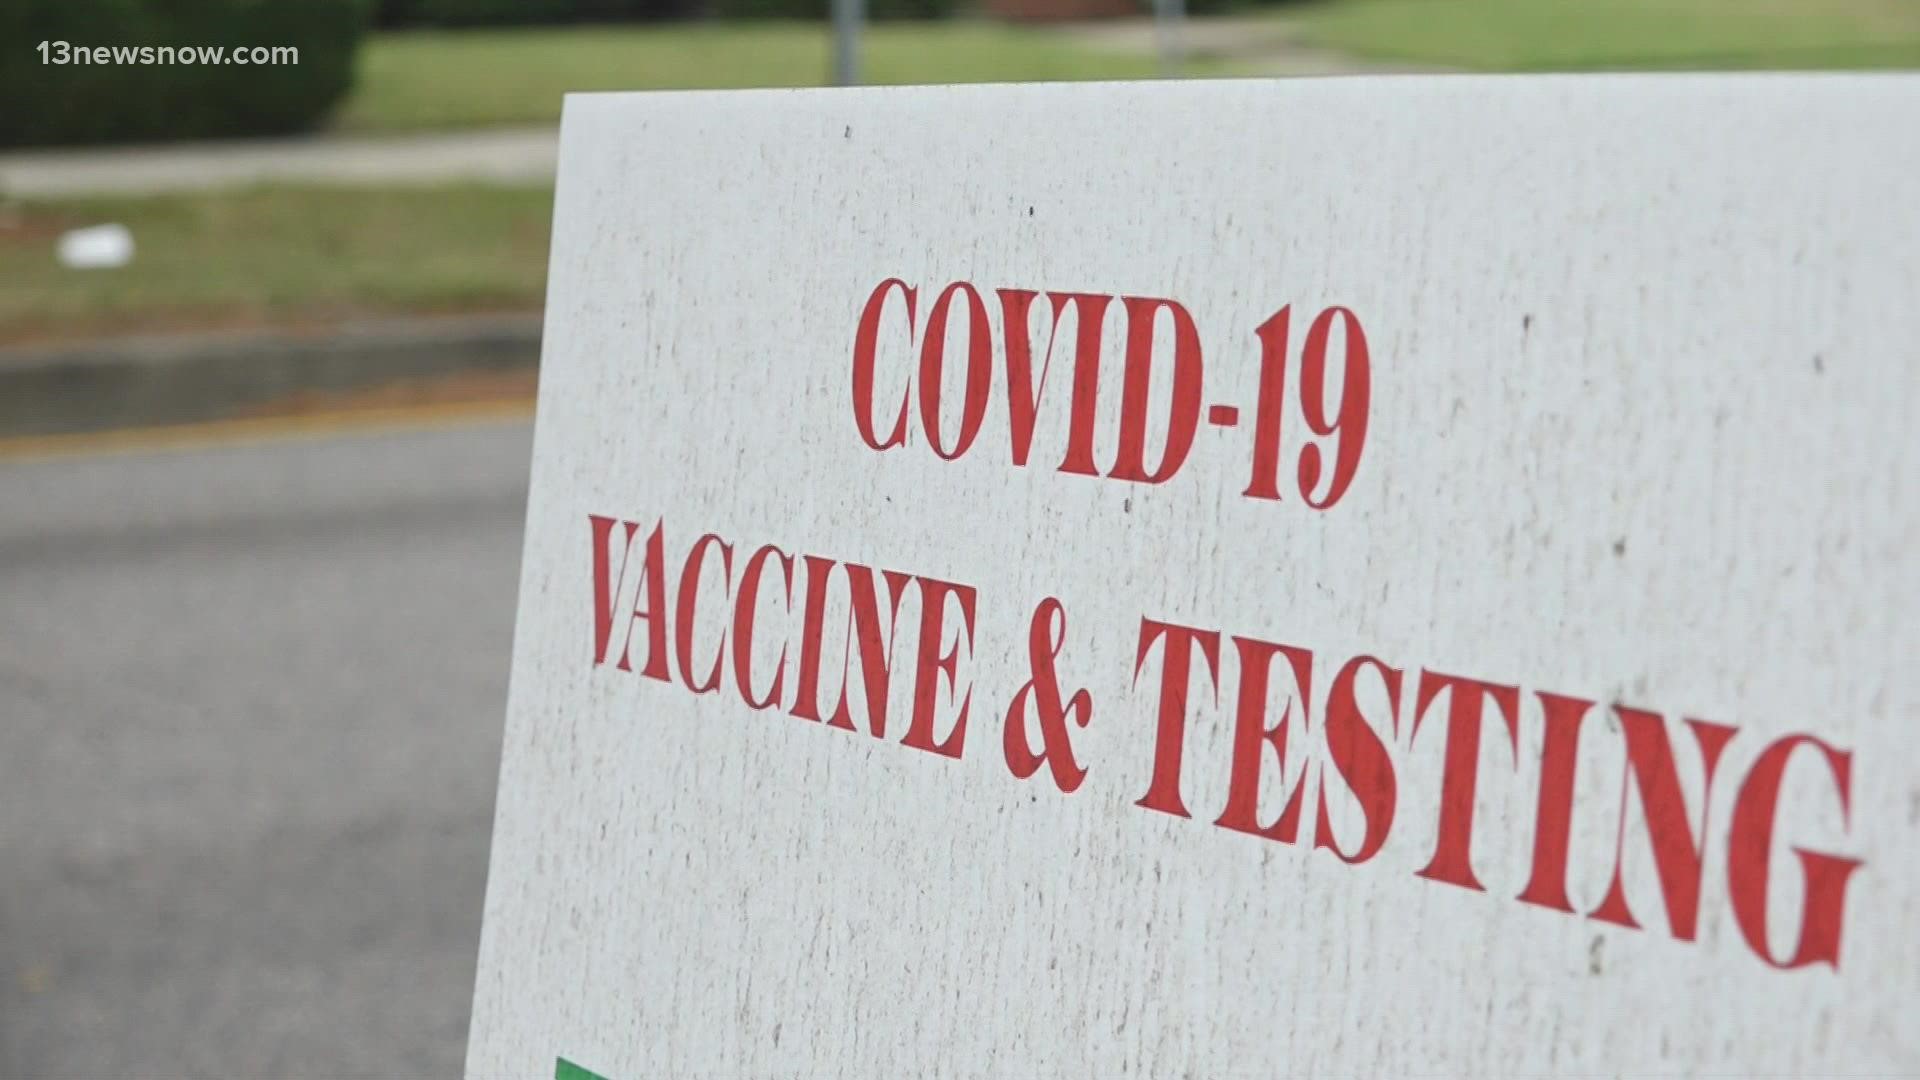 The National Institutes of Health will invest $70 million in making home COVID-19 tests across the country. The Biden administration is aiming to invest $3 billiion.